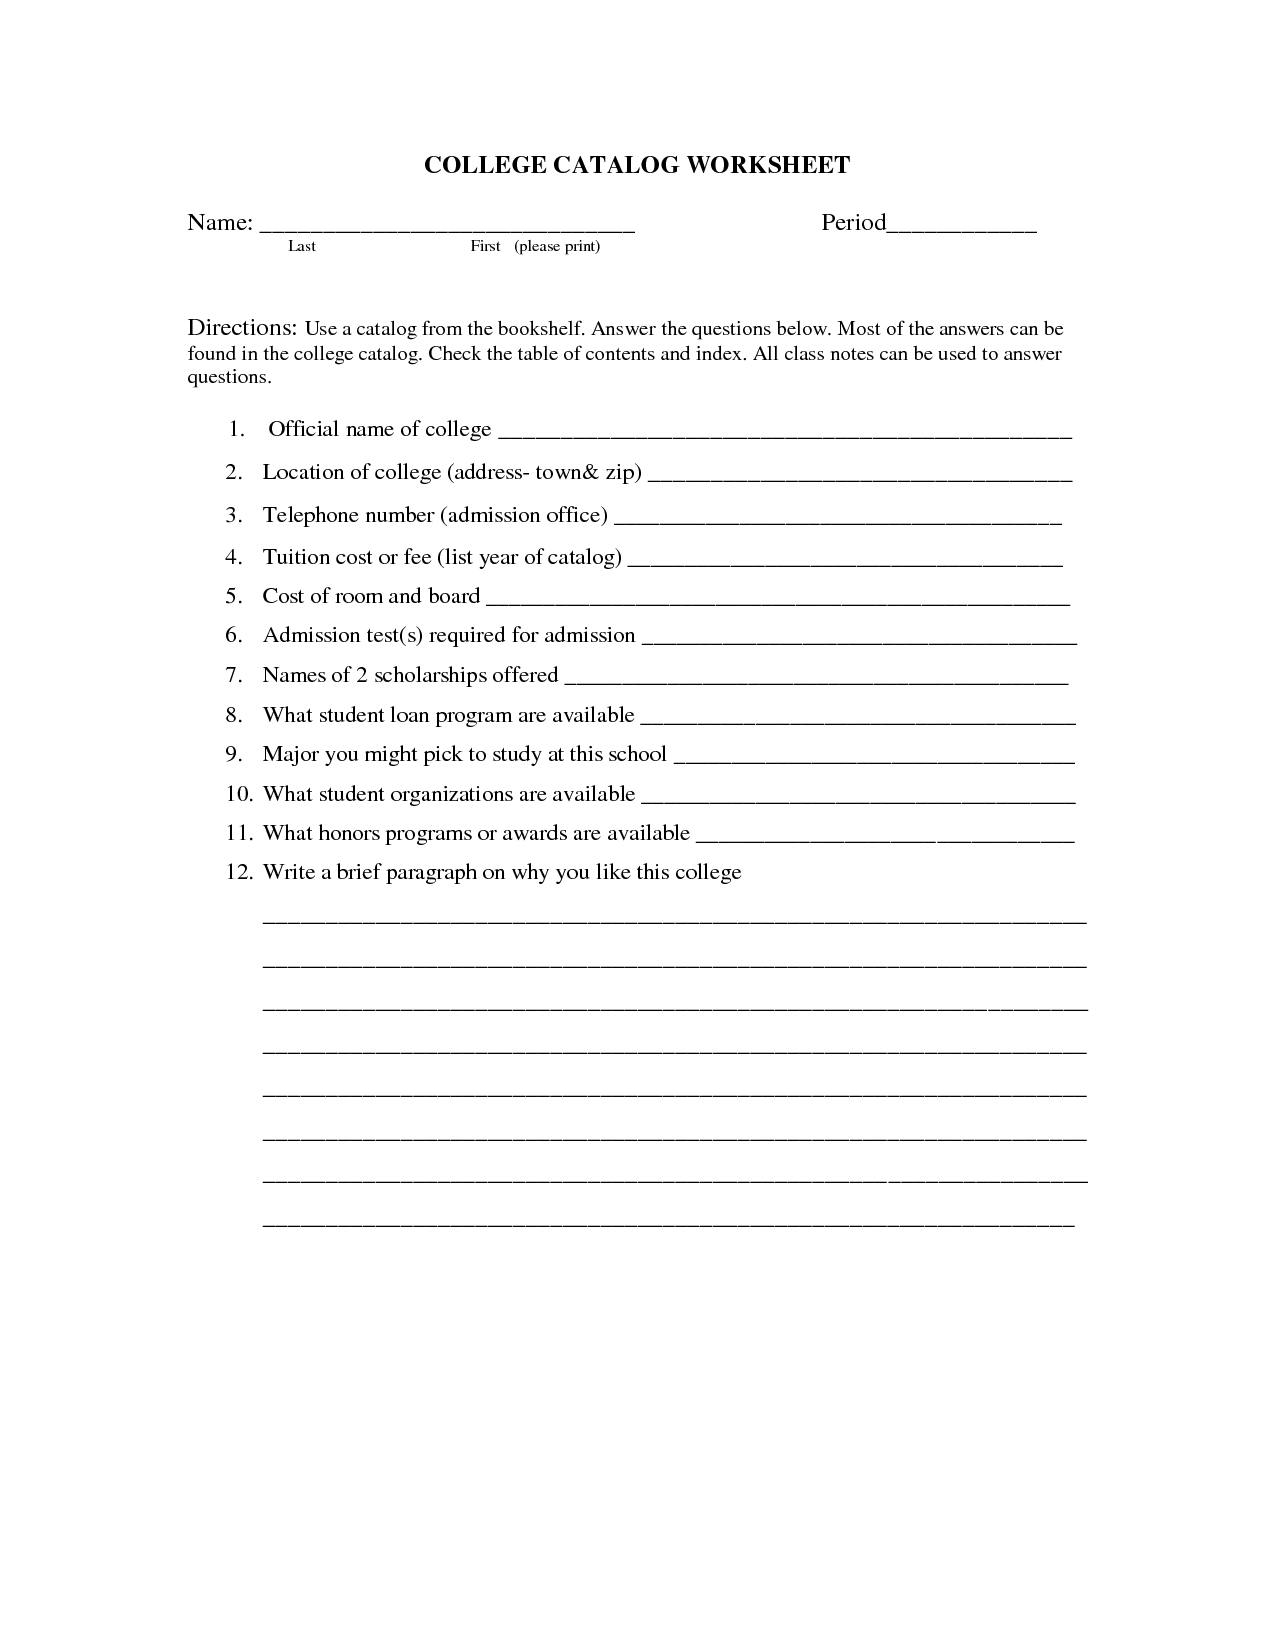 English Worksheets For College Students